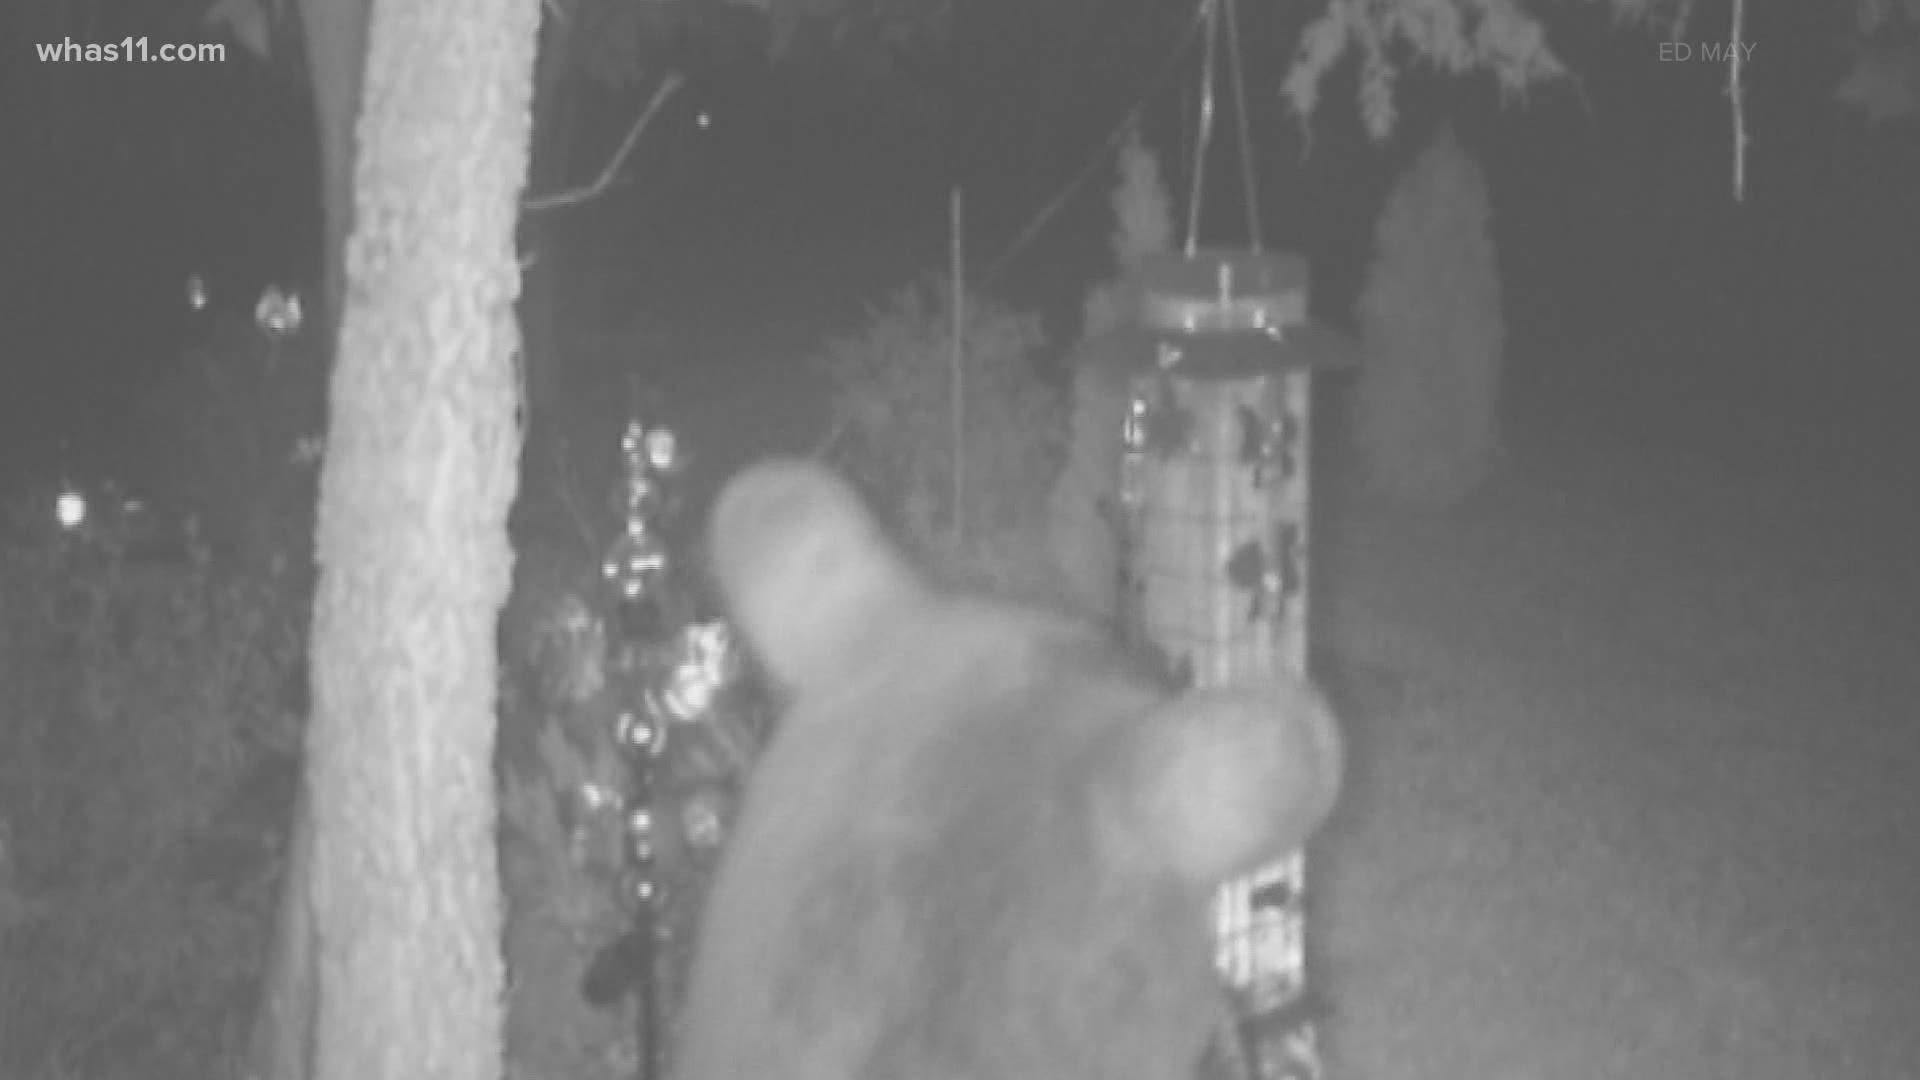 The bear was spotted eating from bird feeders in a neighborhood in Louisville.